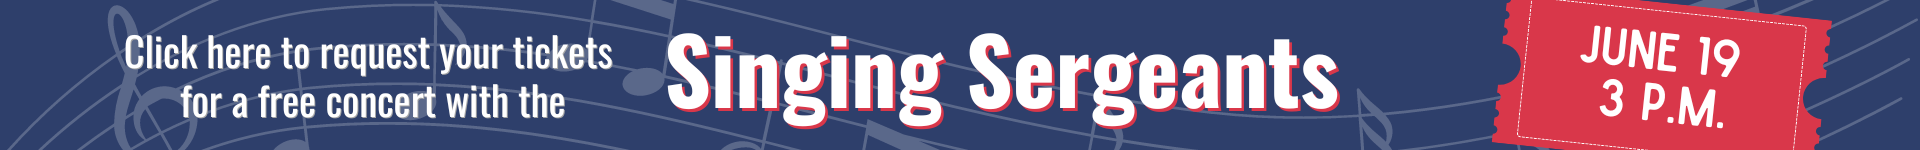 Click here for tickets to a free performance by the Singing Sergeants on June 19 at 3 p.m.. White letters on a dark blue background with a watermarked musical scale in the background.